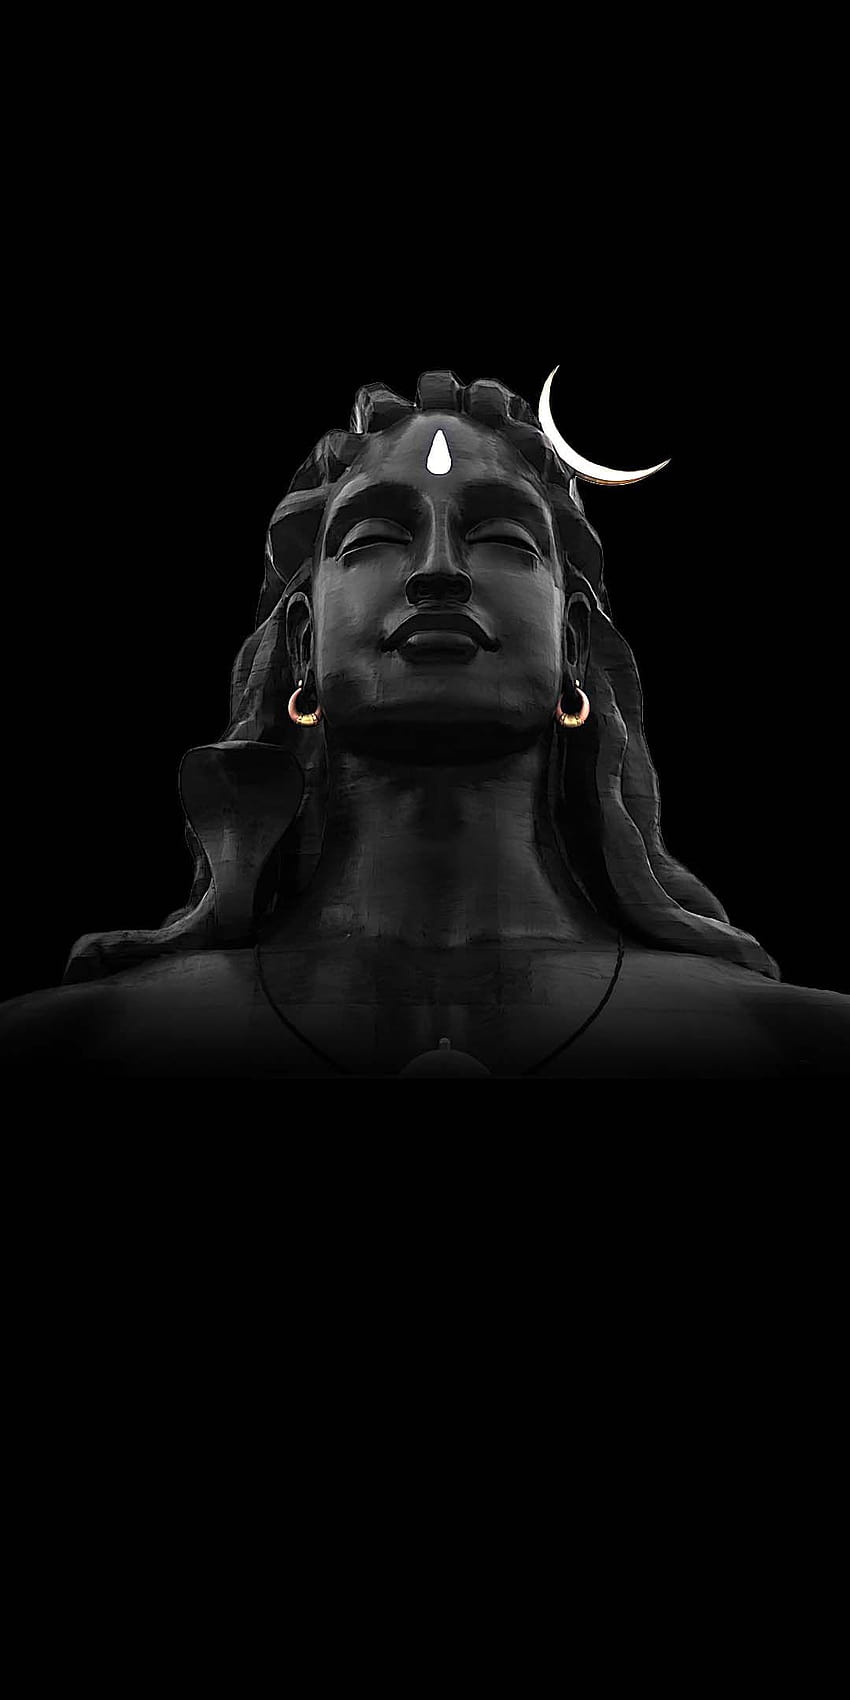 Lord Shiva in 2019, lord shiva angry android HD phone wallpaper